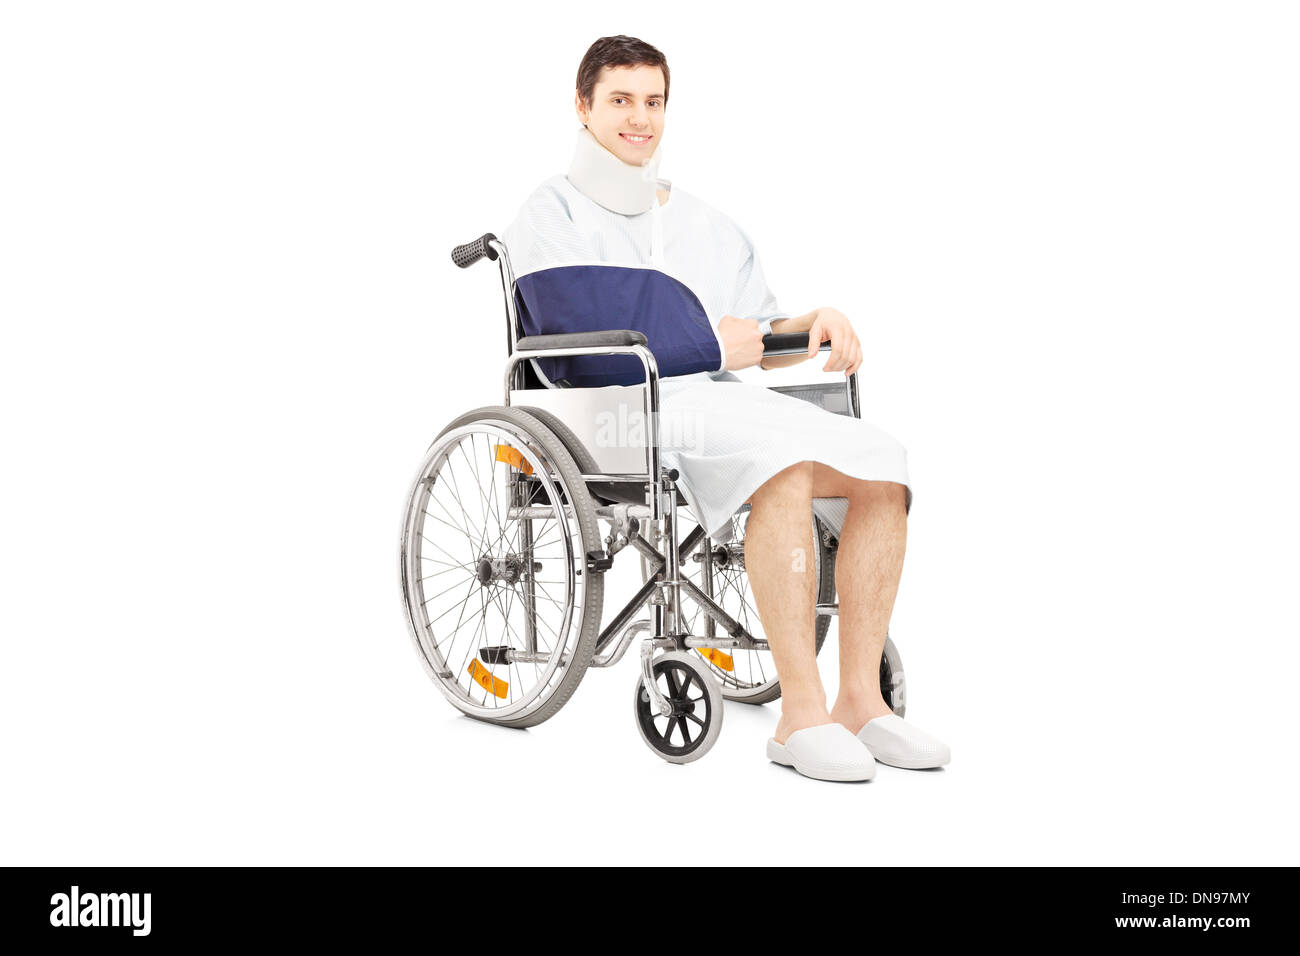 Disabled male patient with broken arm posing in a wheelchair Stock Photo